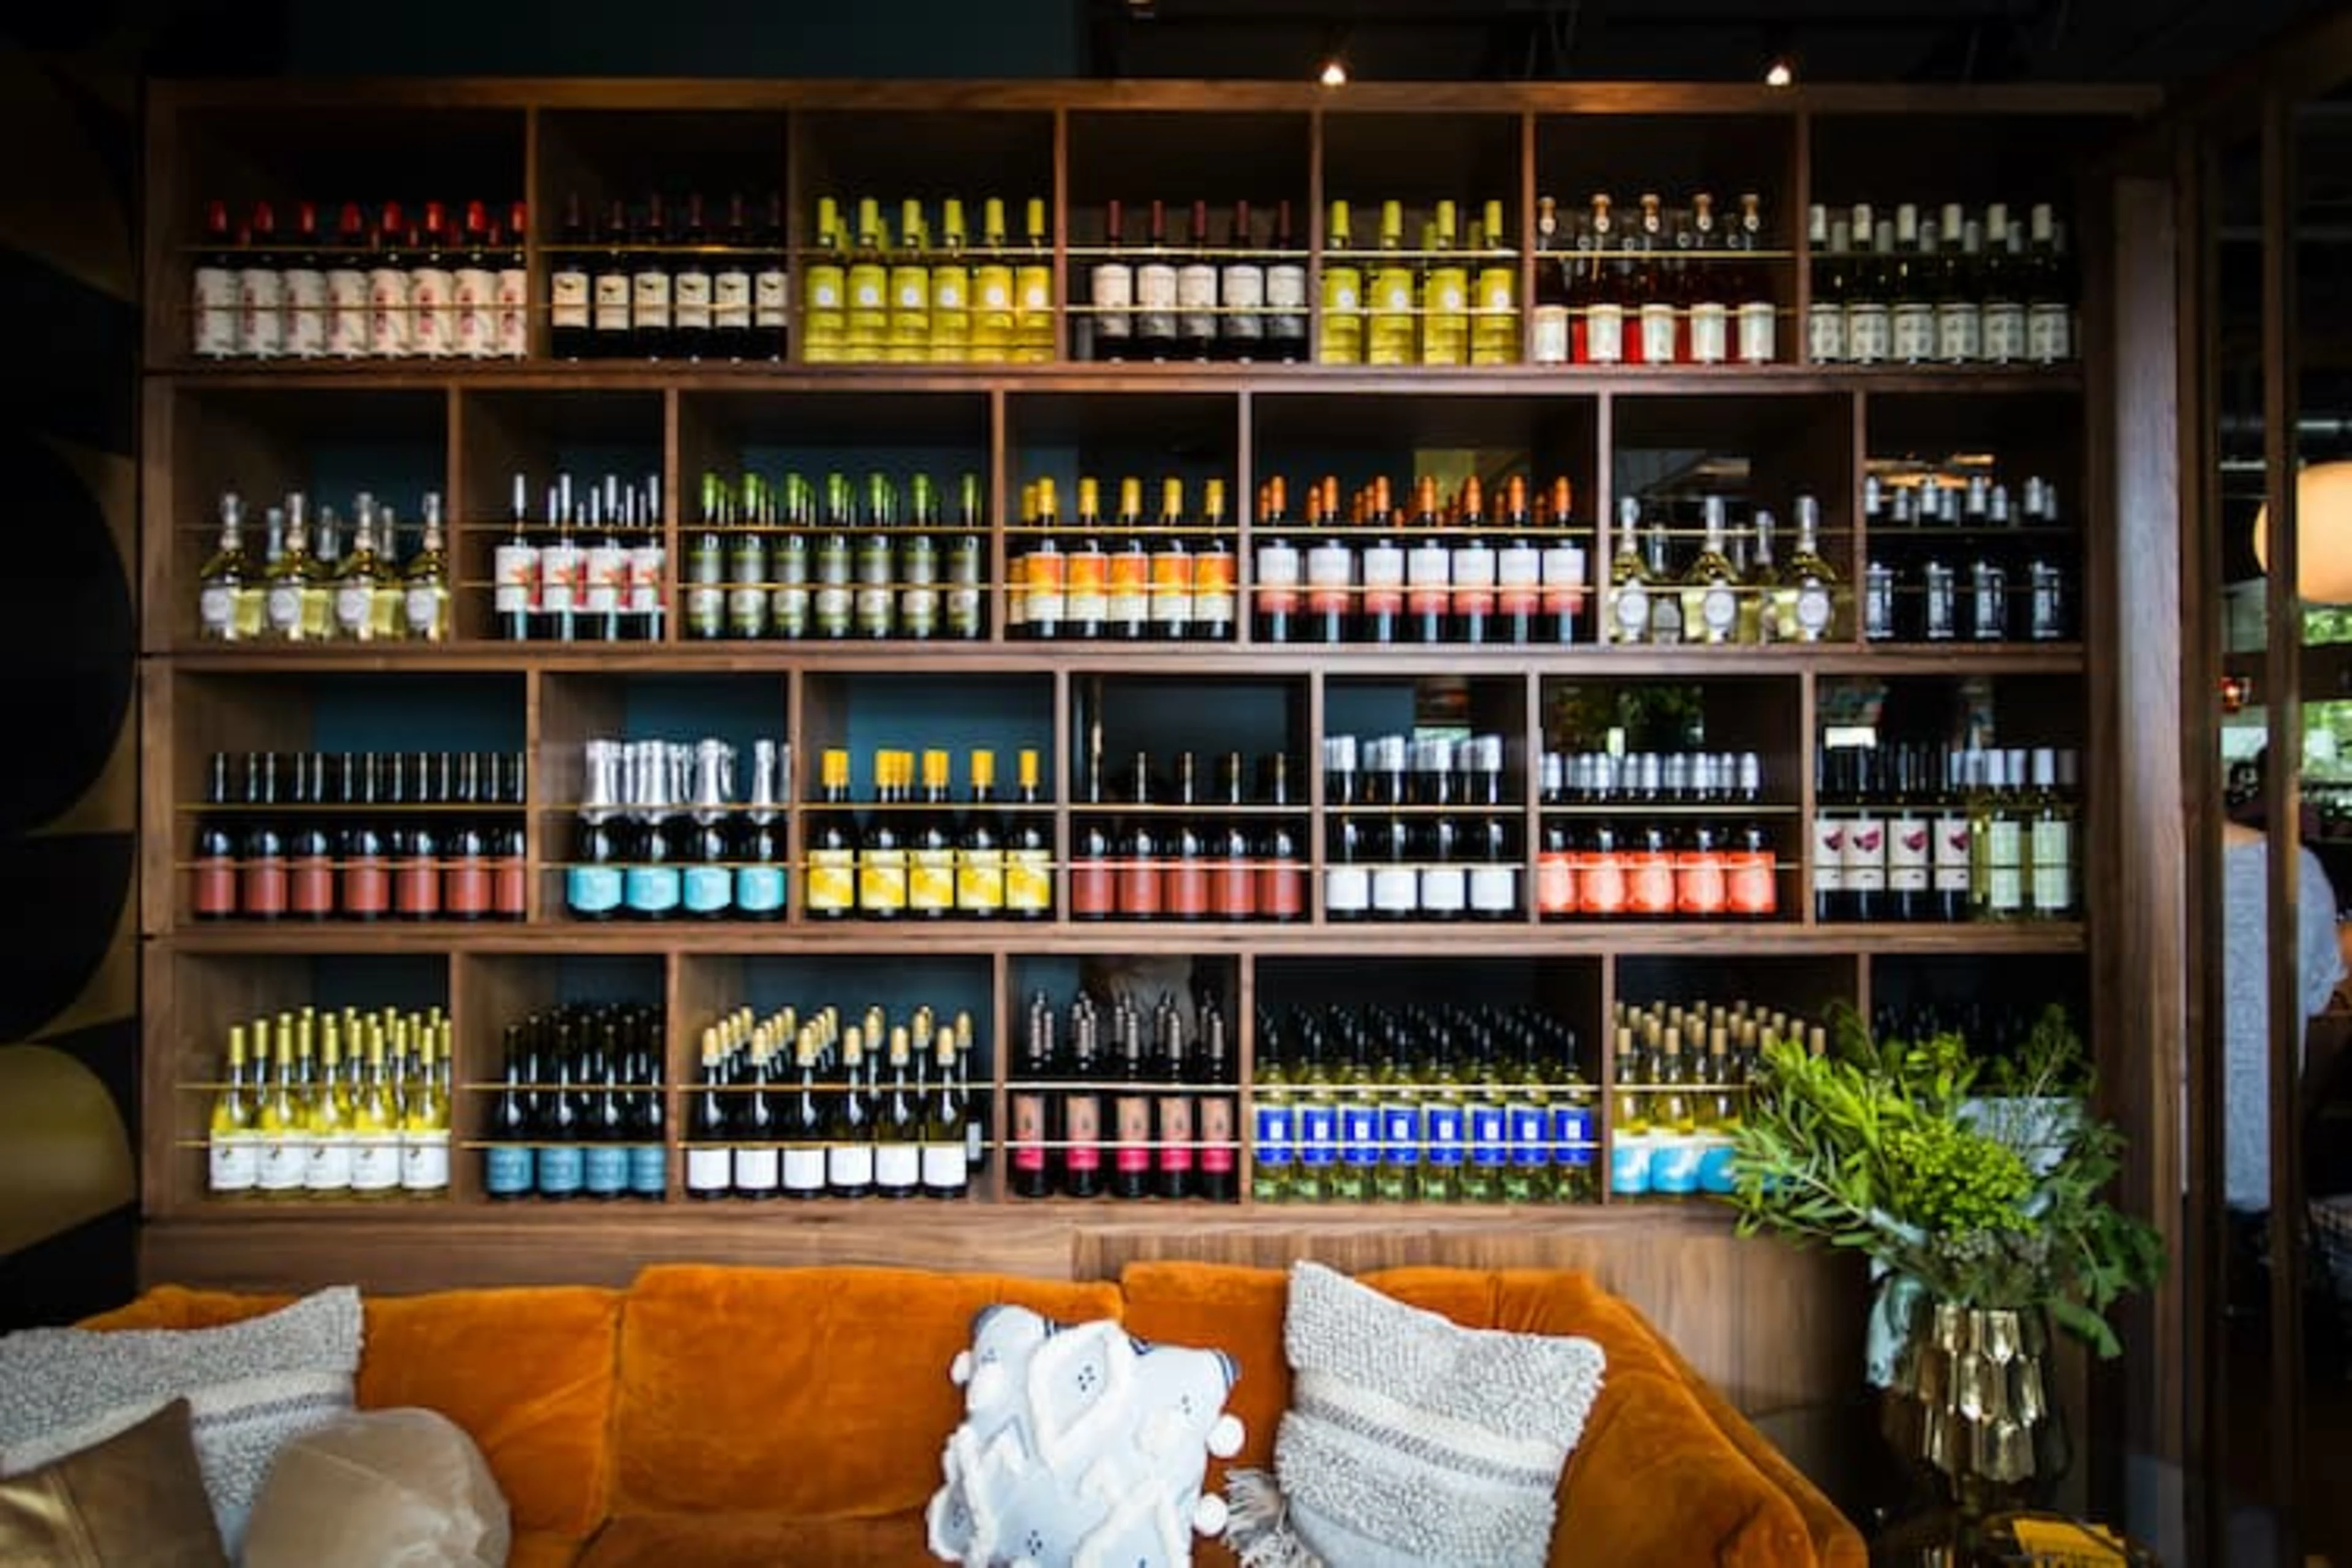 A large wine display on shelves above an orange couch.